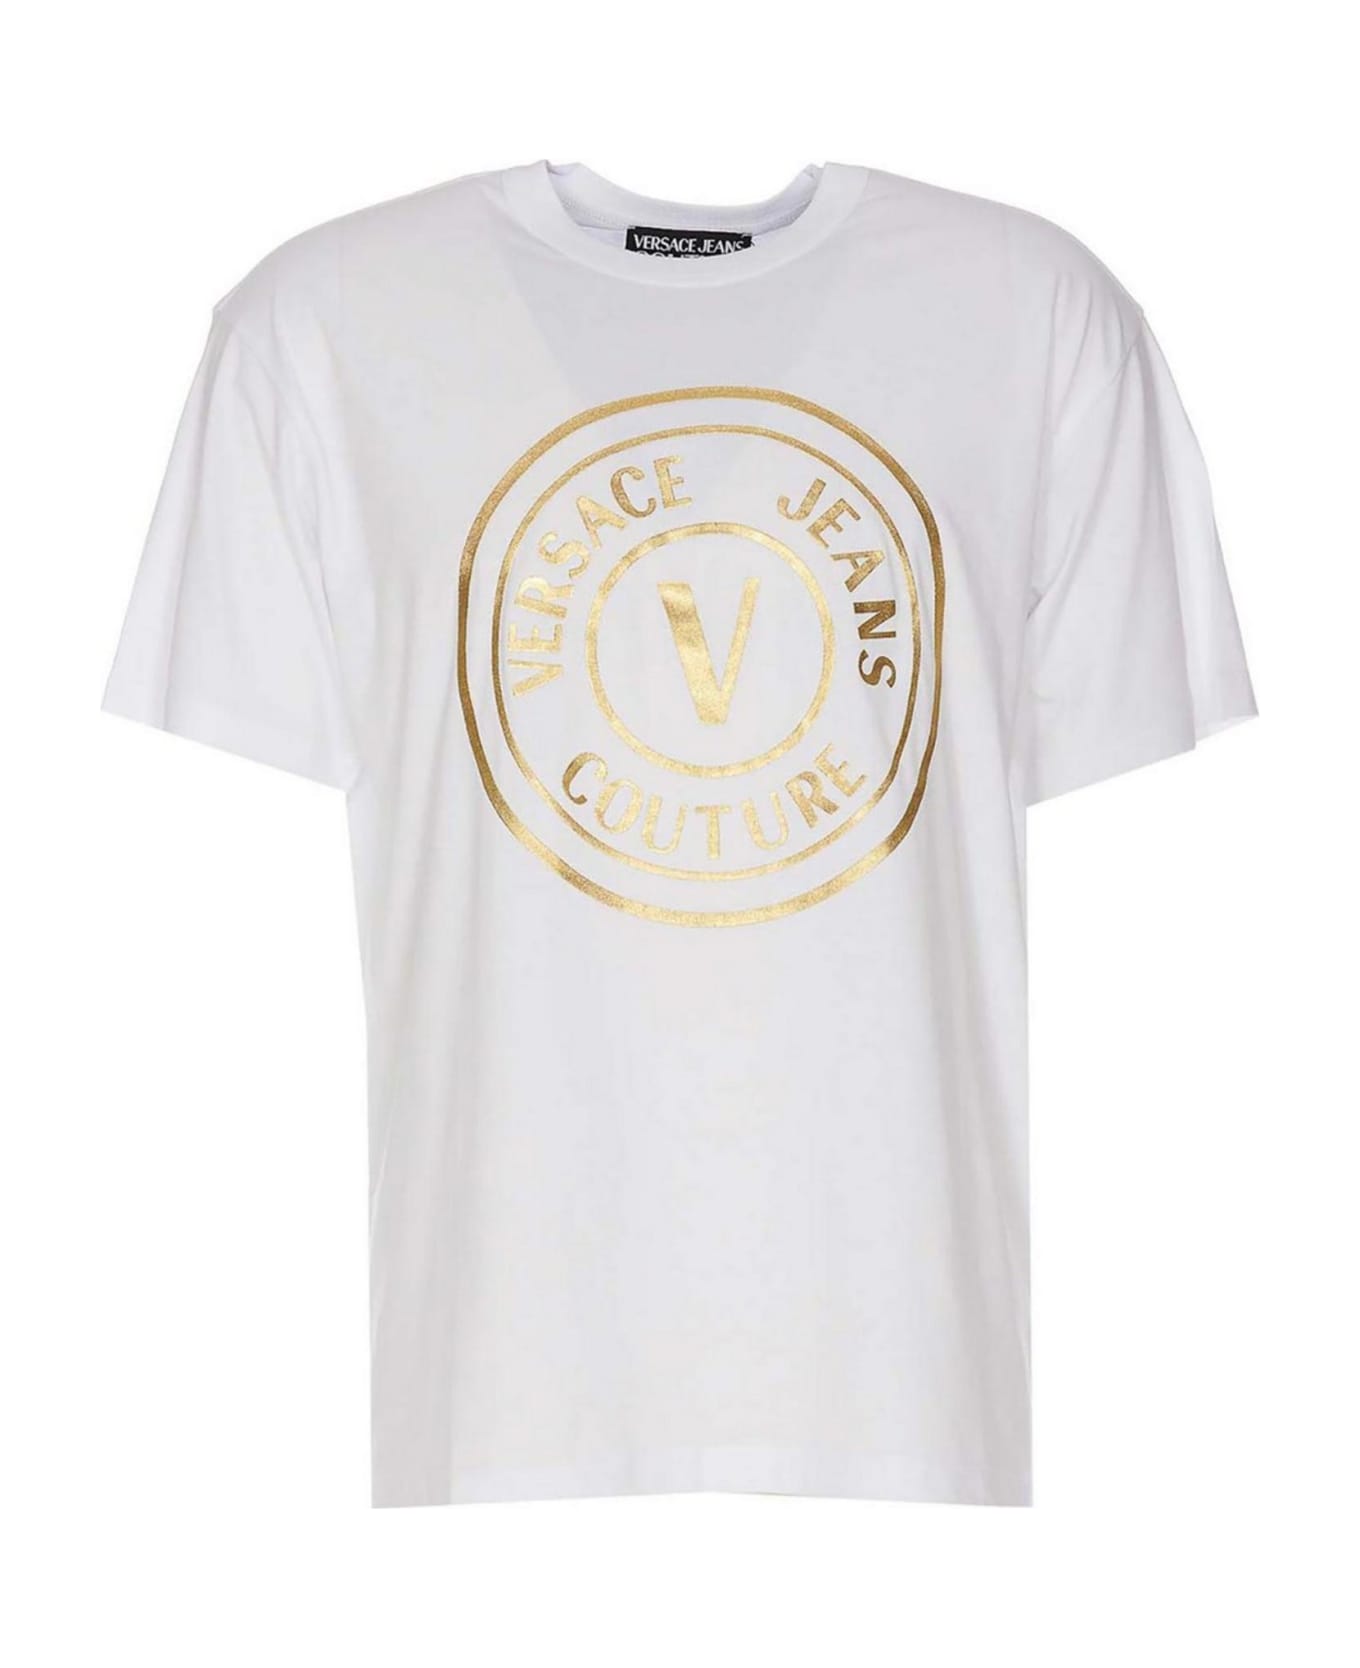 Versace Jeans Couture T-shirt - White gold